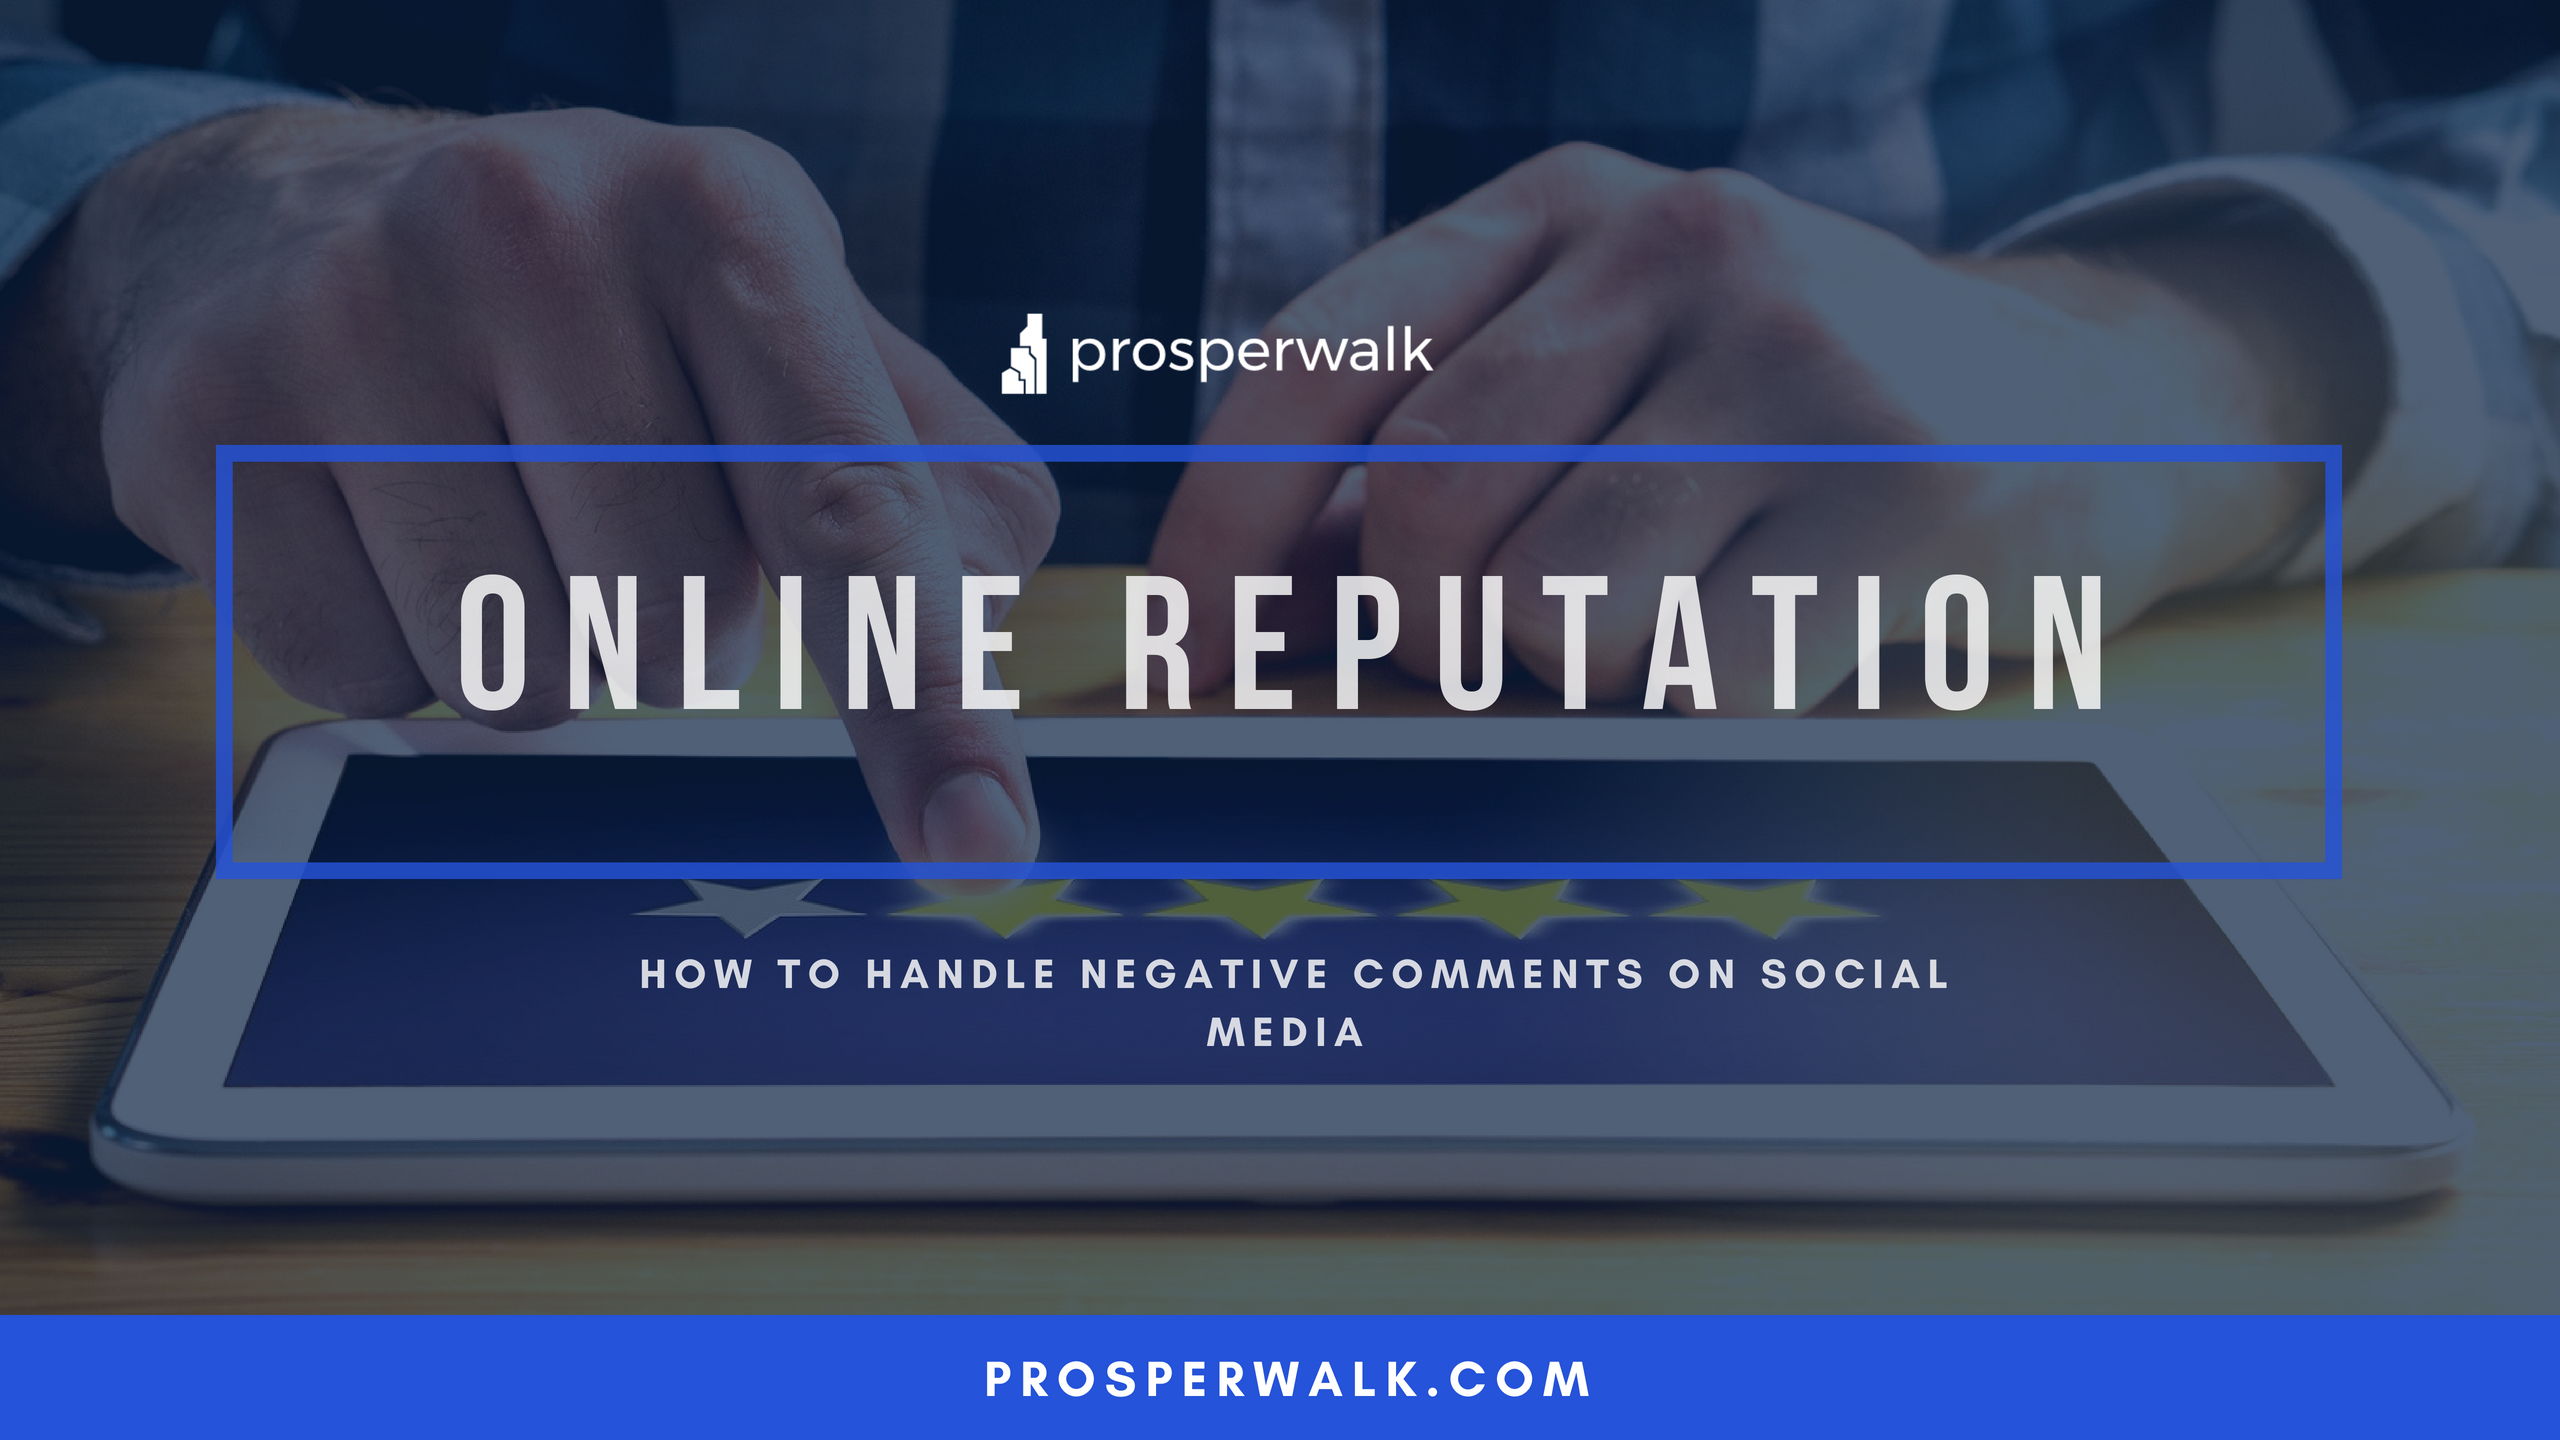 ONLINE REPUTATION: HOW TO HANDLE NEGATIVE COMMENTS ON SOCIAL MEDIA